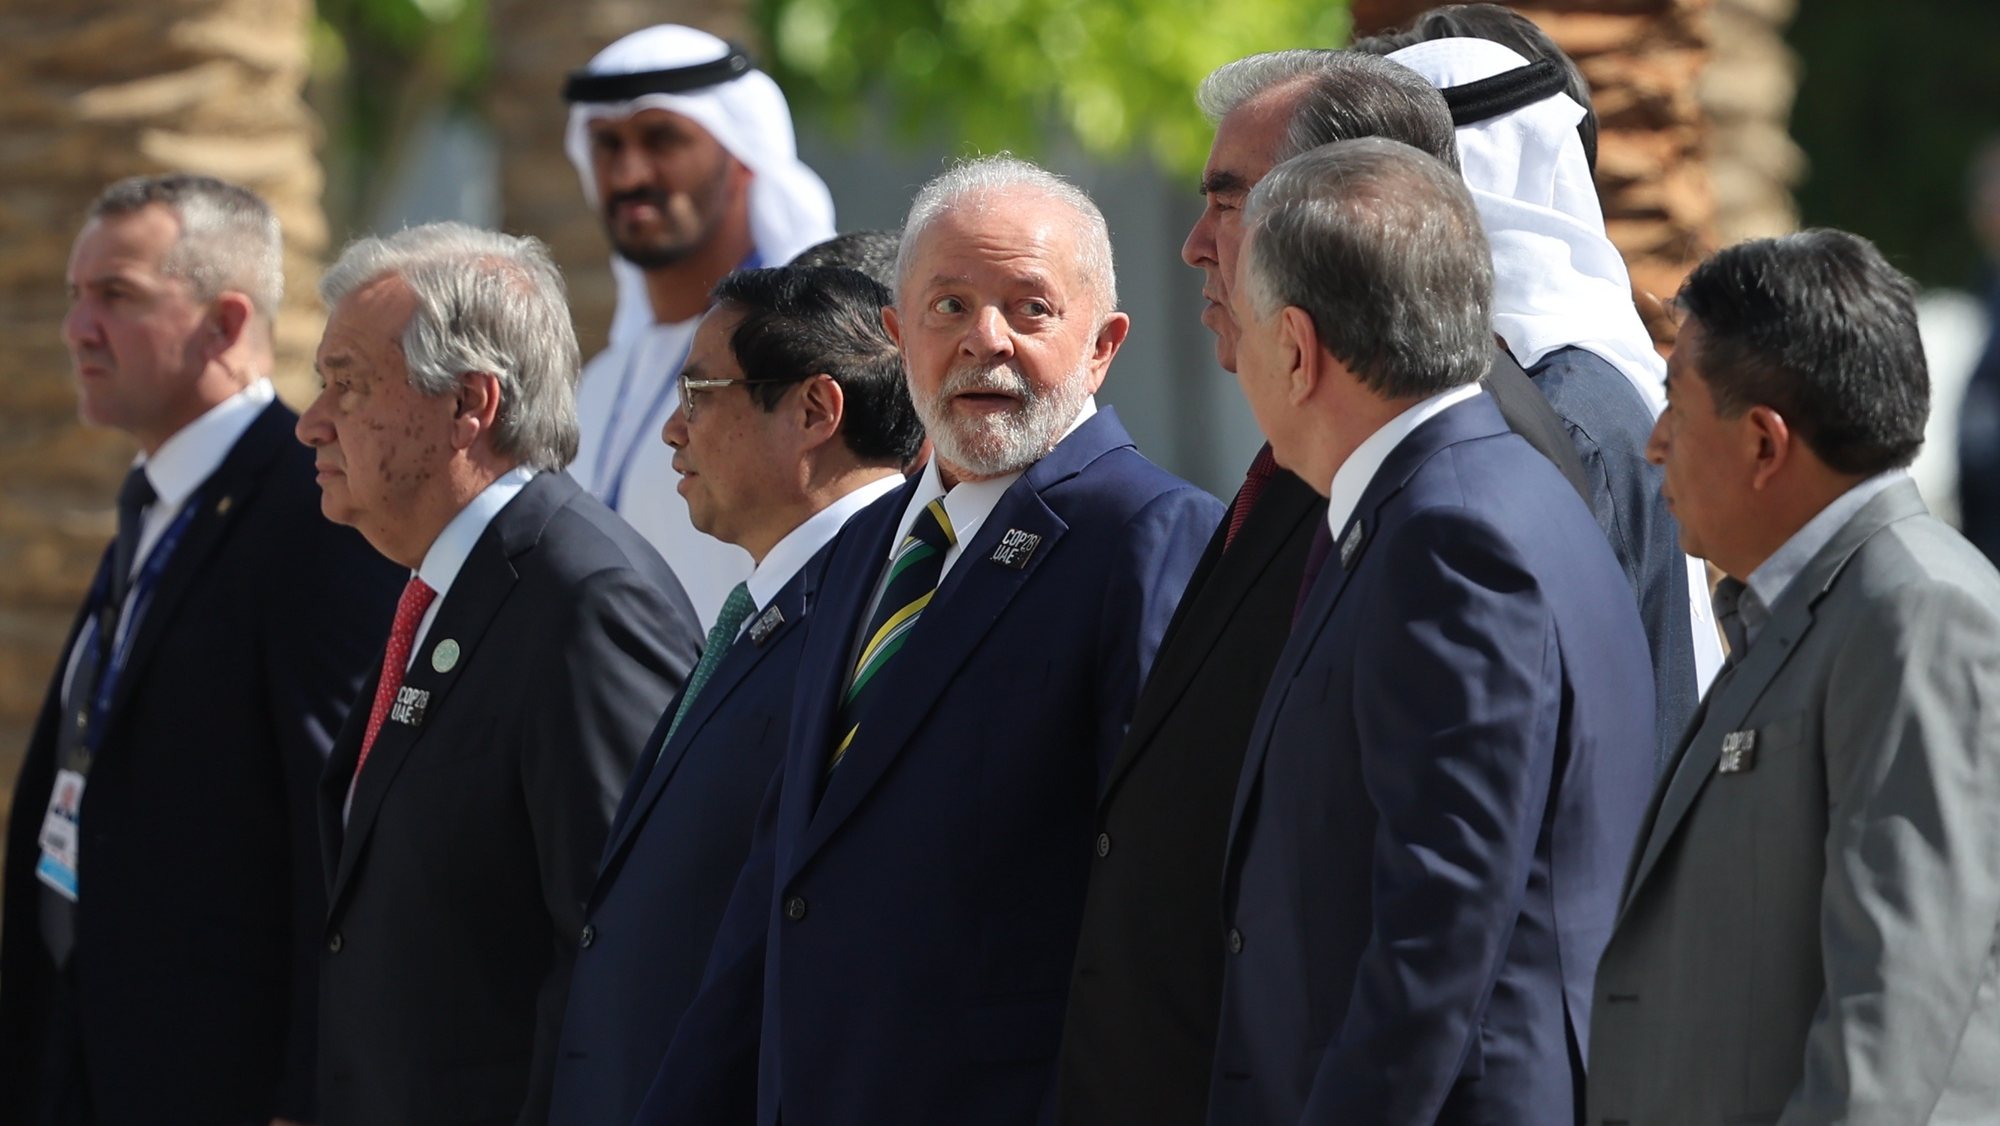 epa11005890 President of Brazil Luiz Inacio Lula da Silva (C) walks with other leaders during the 2023 United Nations Climate Change Conference (COP28) at Expo City Dubai in Dubai, UAE, 01 December 2023. The 2023 United Nations Climate Change Conference (COP28), runs from 30 November to 12 December, and is expected to host one of the largest number of participants in the annual global climate conference as over 70,000 estimated attendees, including the member states of the UN Framework Convention on Climate Change (UNFCCC), business leaders, young people, climate scientists, Indigenous Peoples and other relevant stakeholders will attend.  EPA/ALI HAIDER